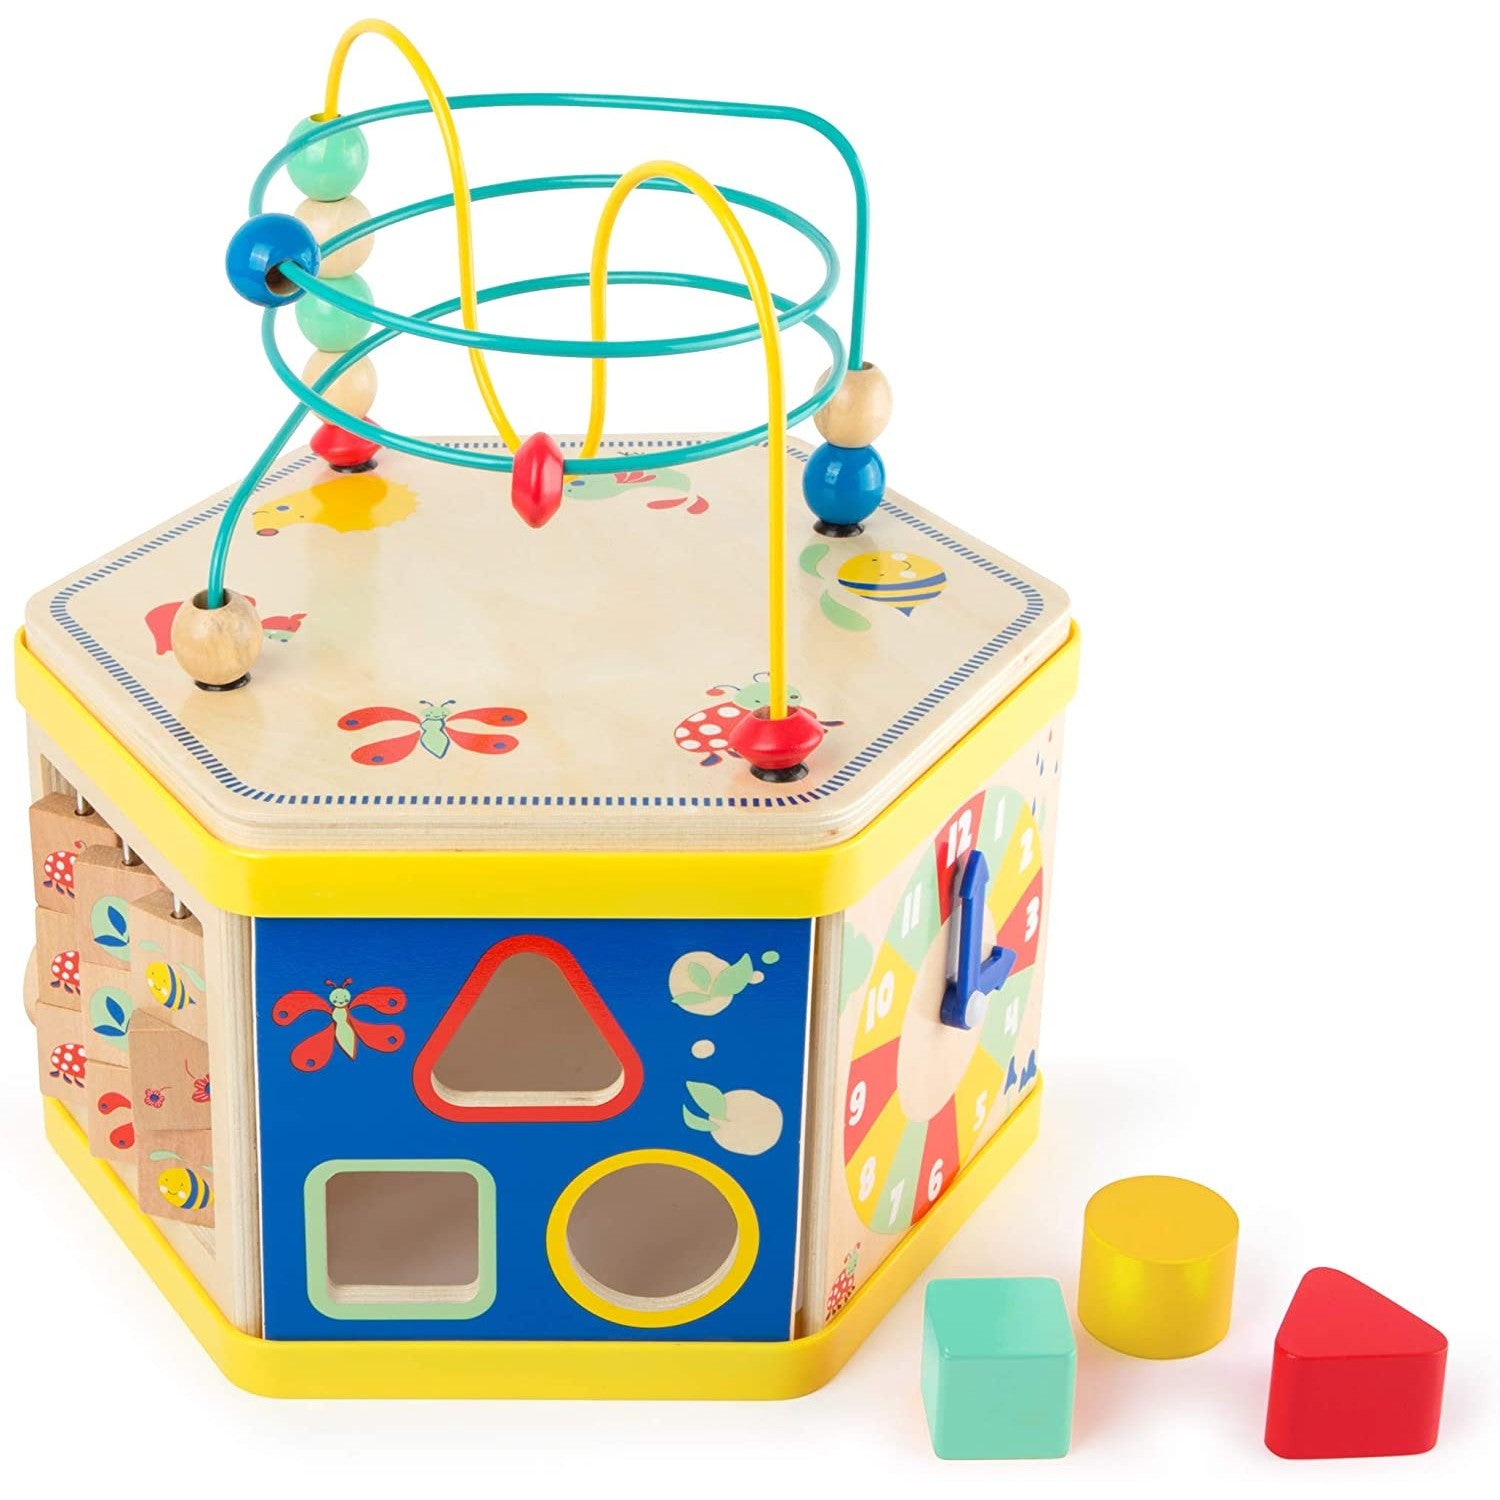 Activity Center with Shape Sorter Sweet Little Bug Theme